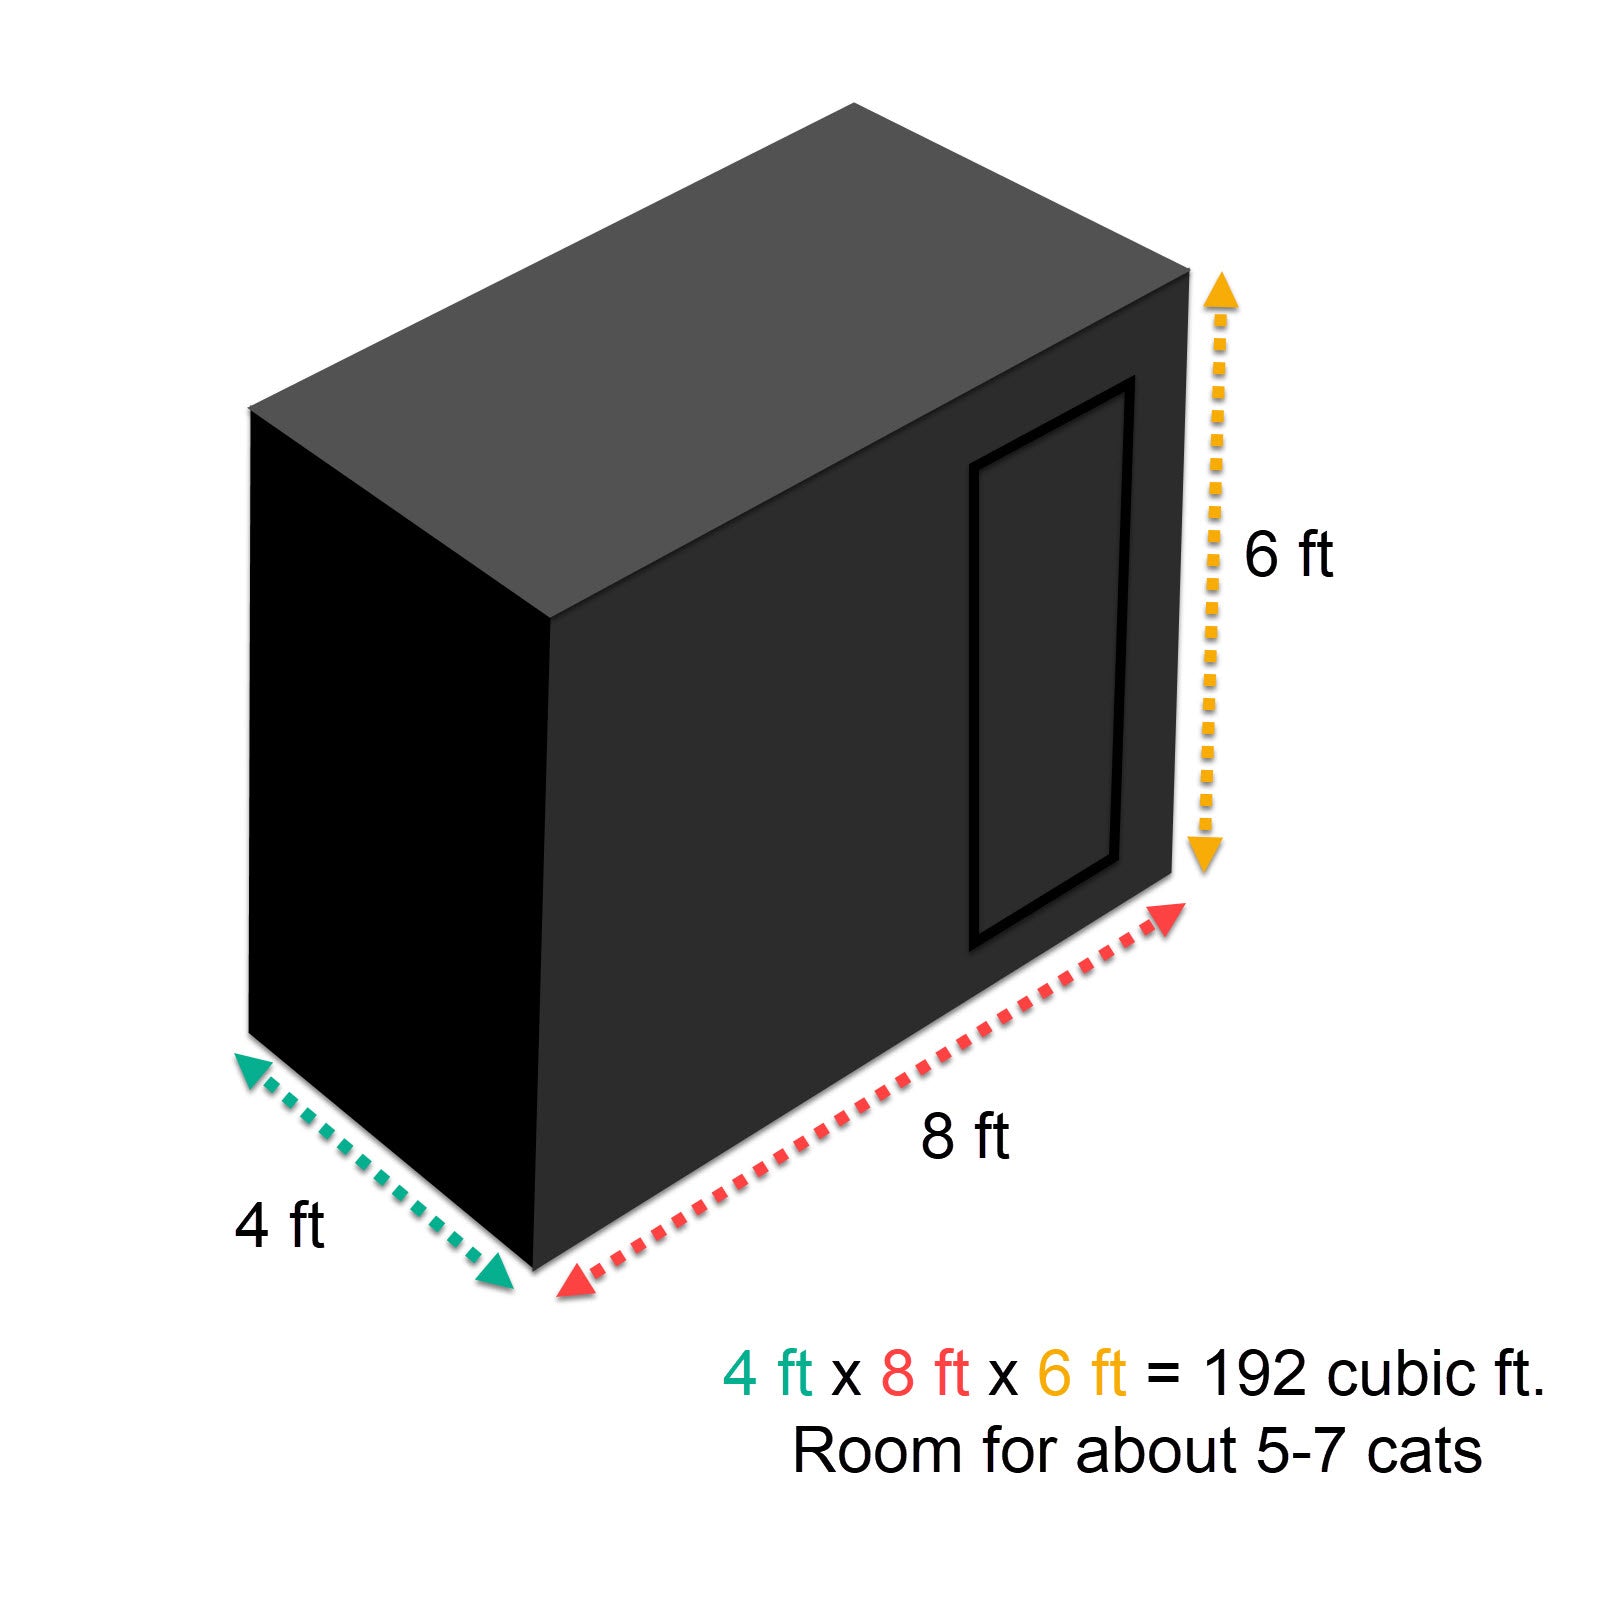 diagram of catio dimensions and cubic feet